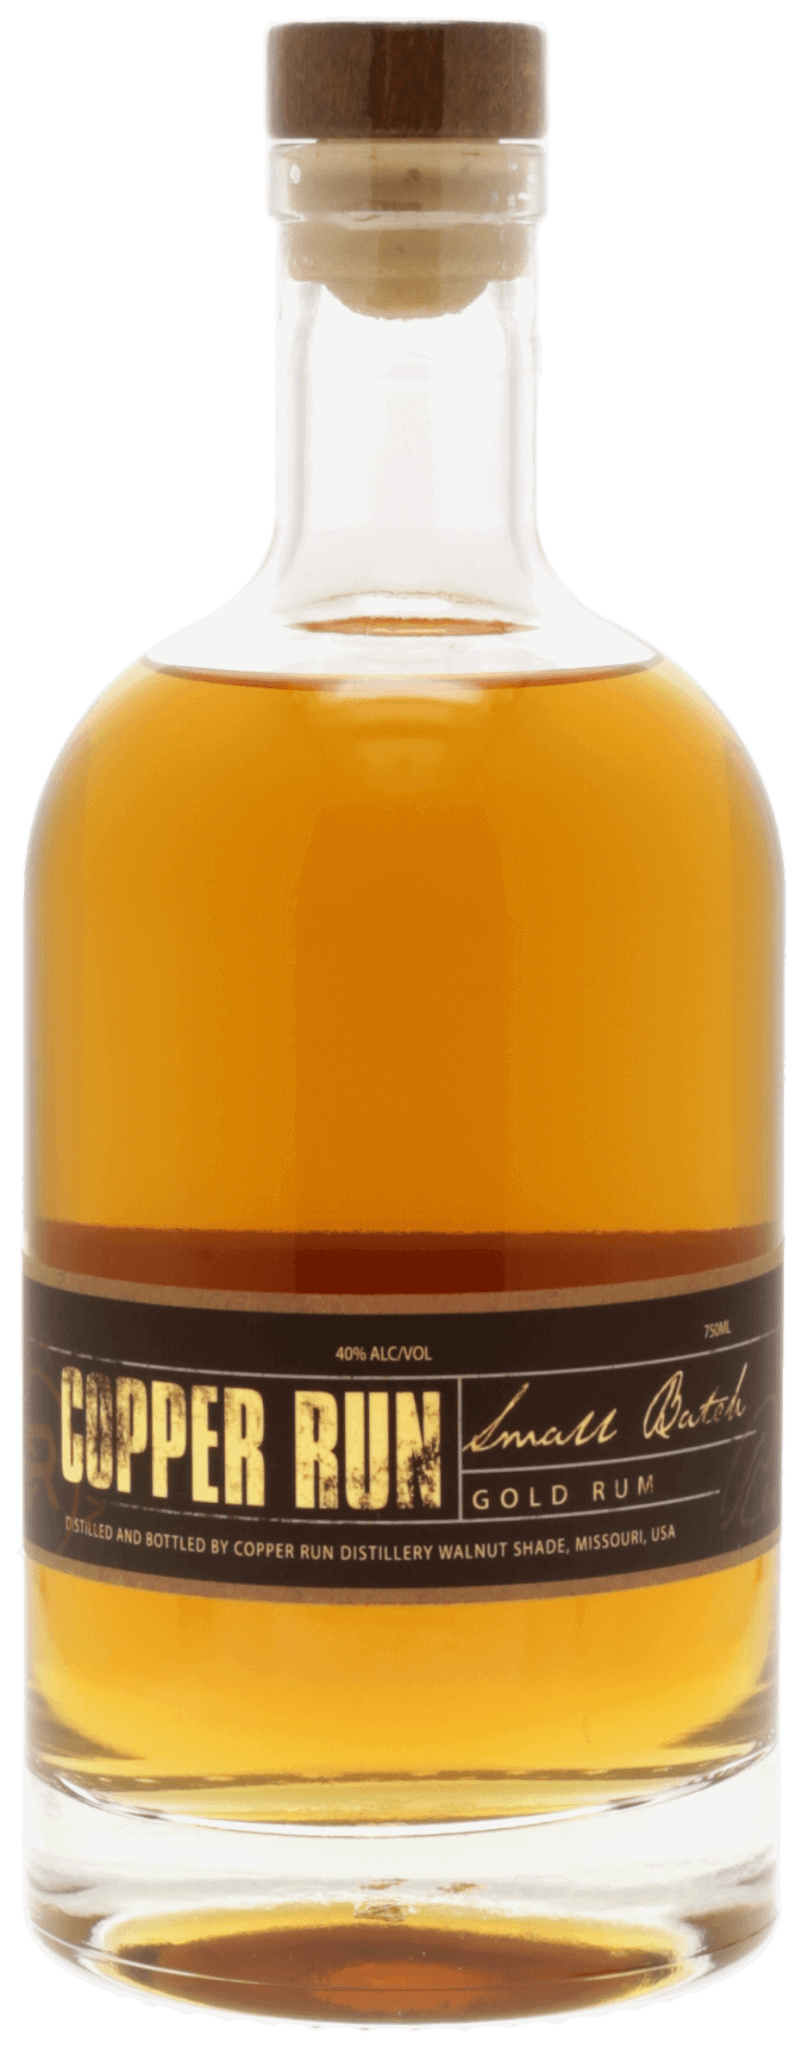 Small Batch Gold Rum